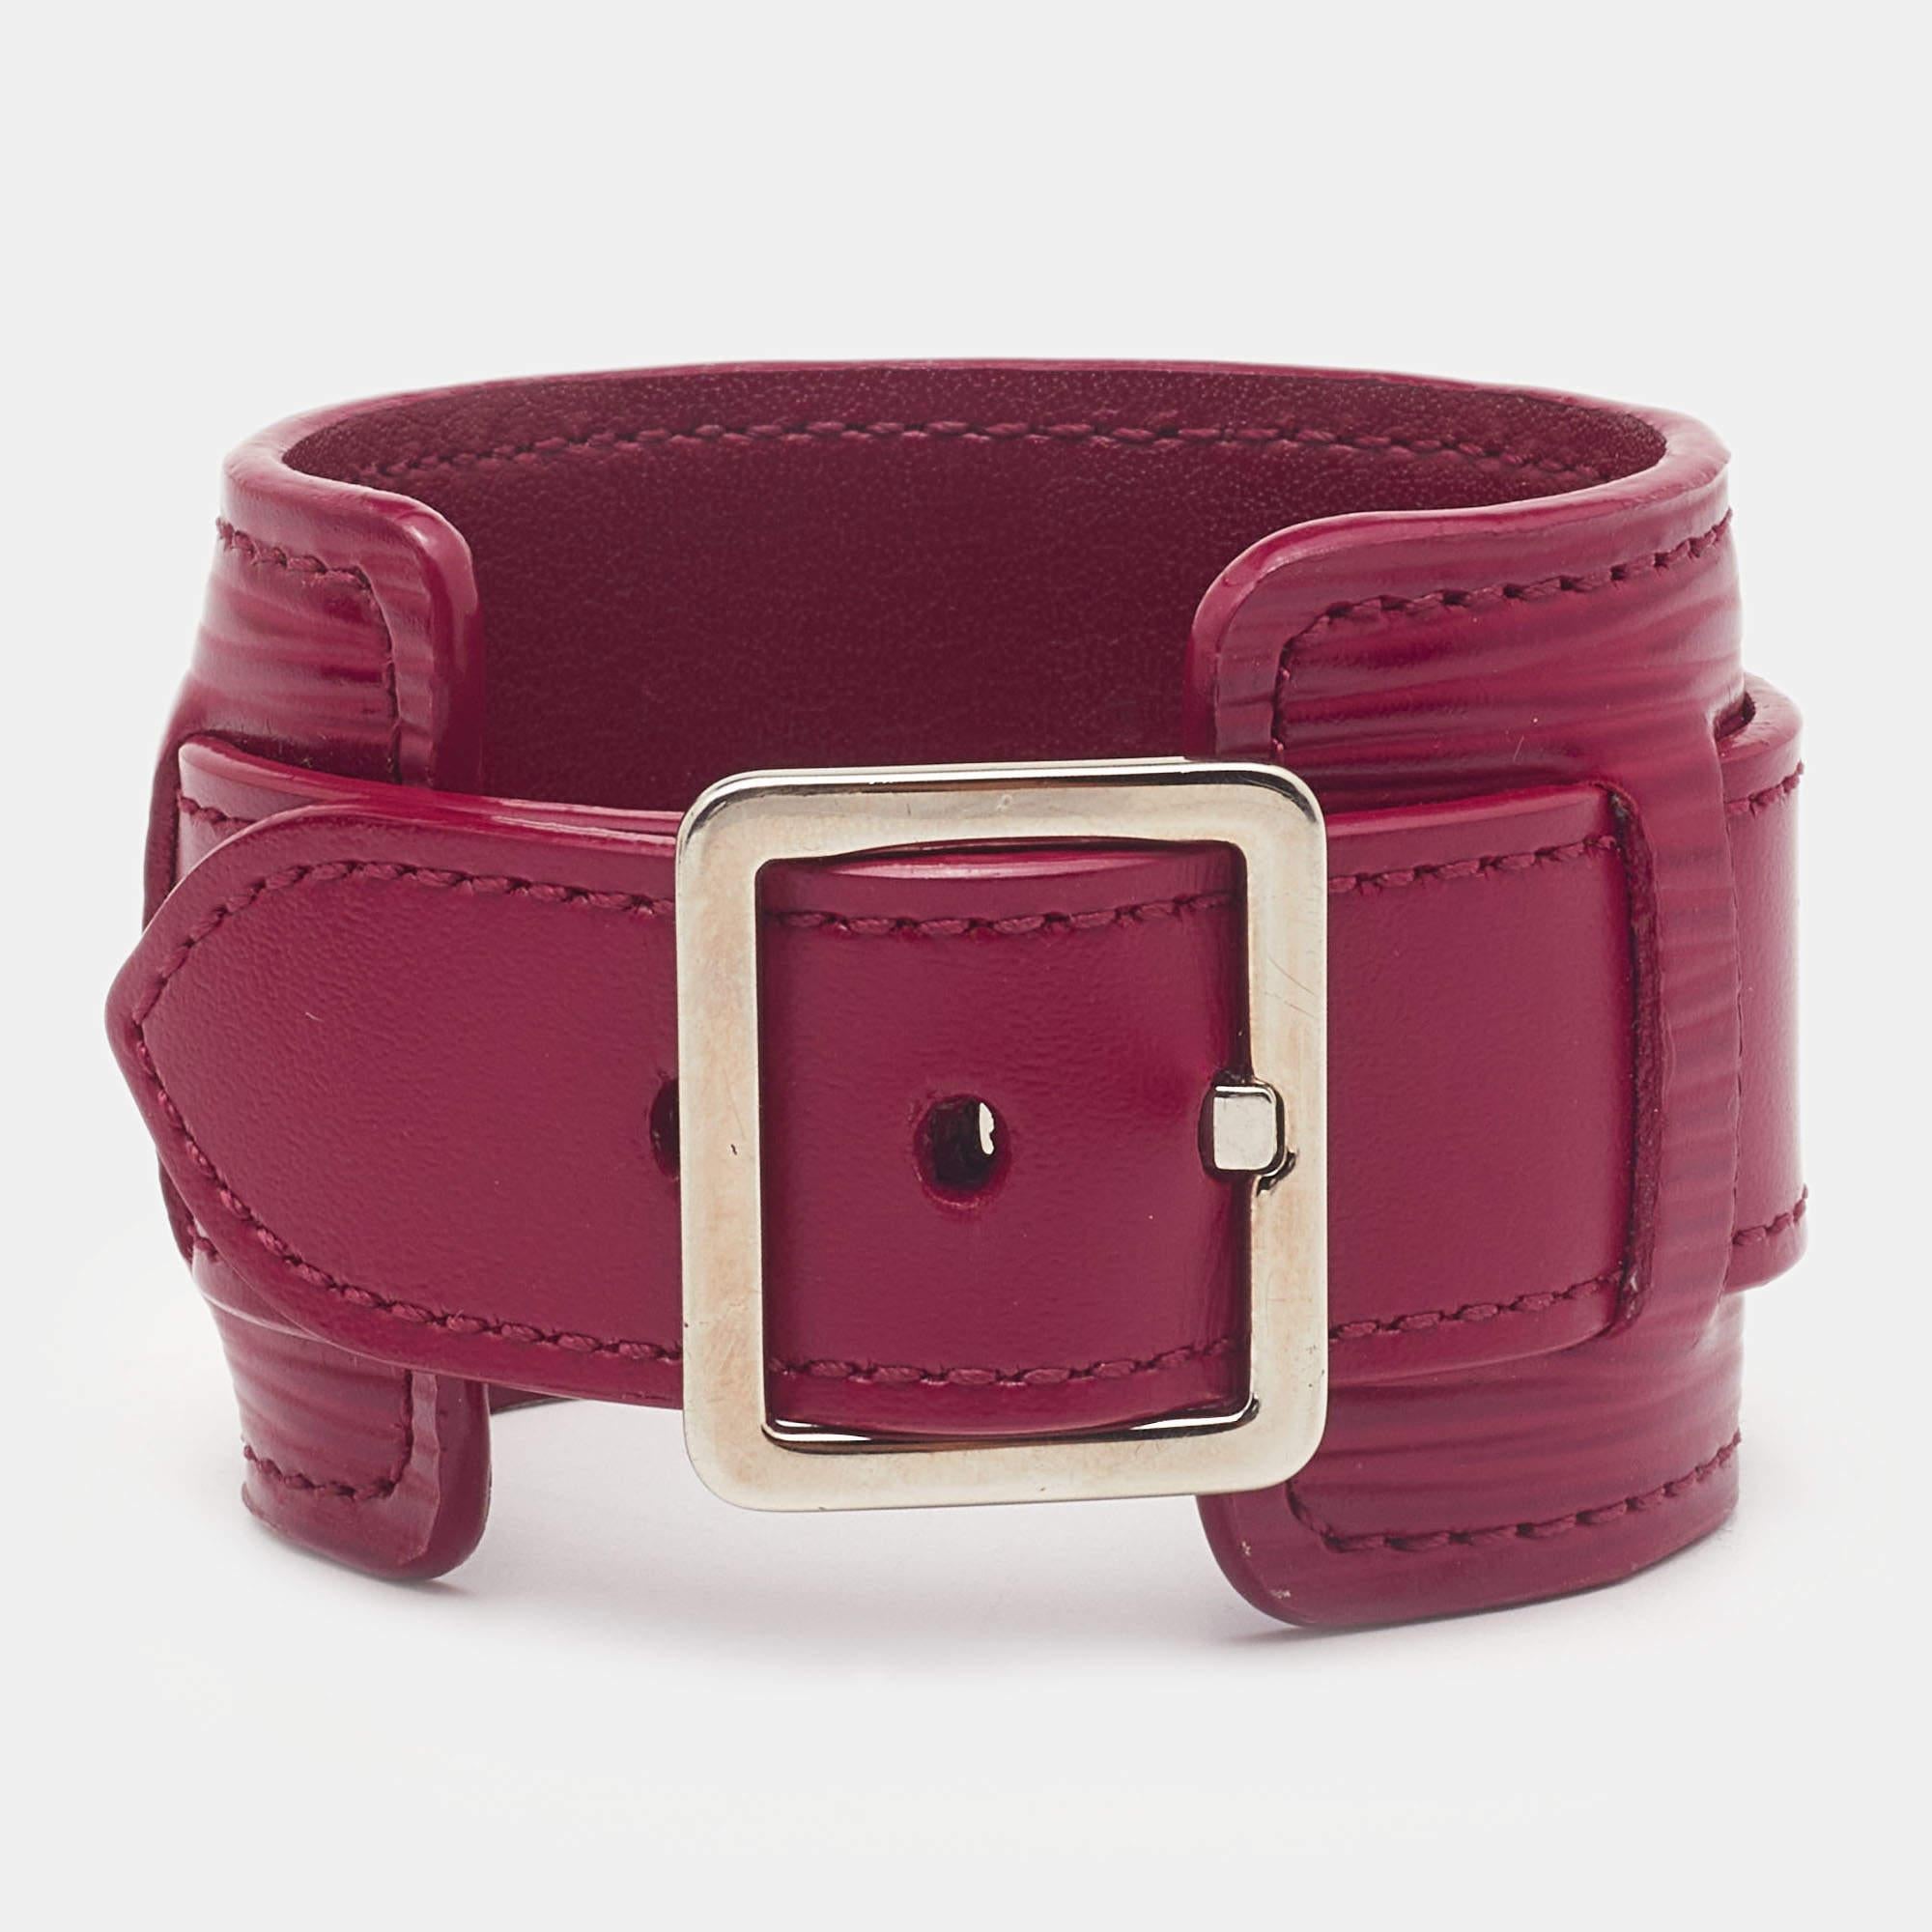 To accompany all your outings, day in and day out, Louis Vuitton brings you this gorgeous Infinit cuff bracelet that has been made from Vernis leather. The bracelet is complete with an engraved, enamel-coated padlock.

Includes: Original Dustbag

